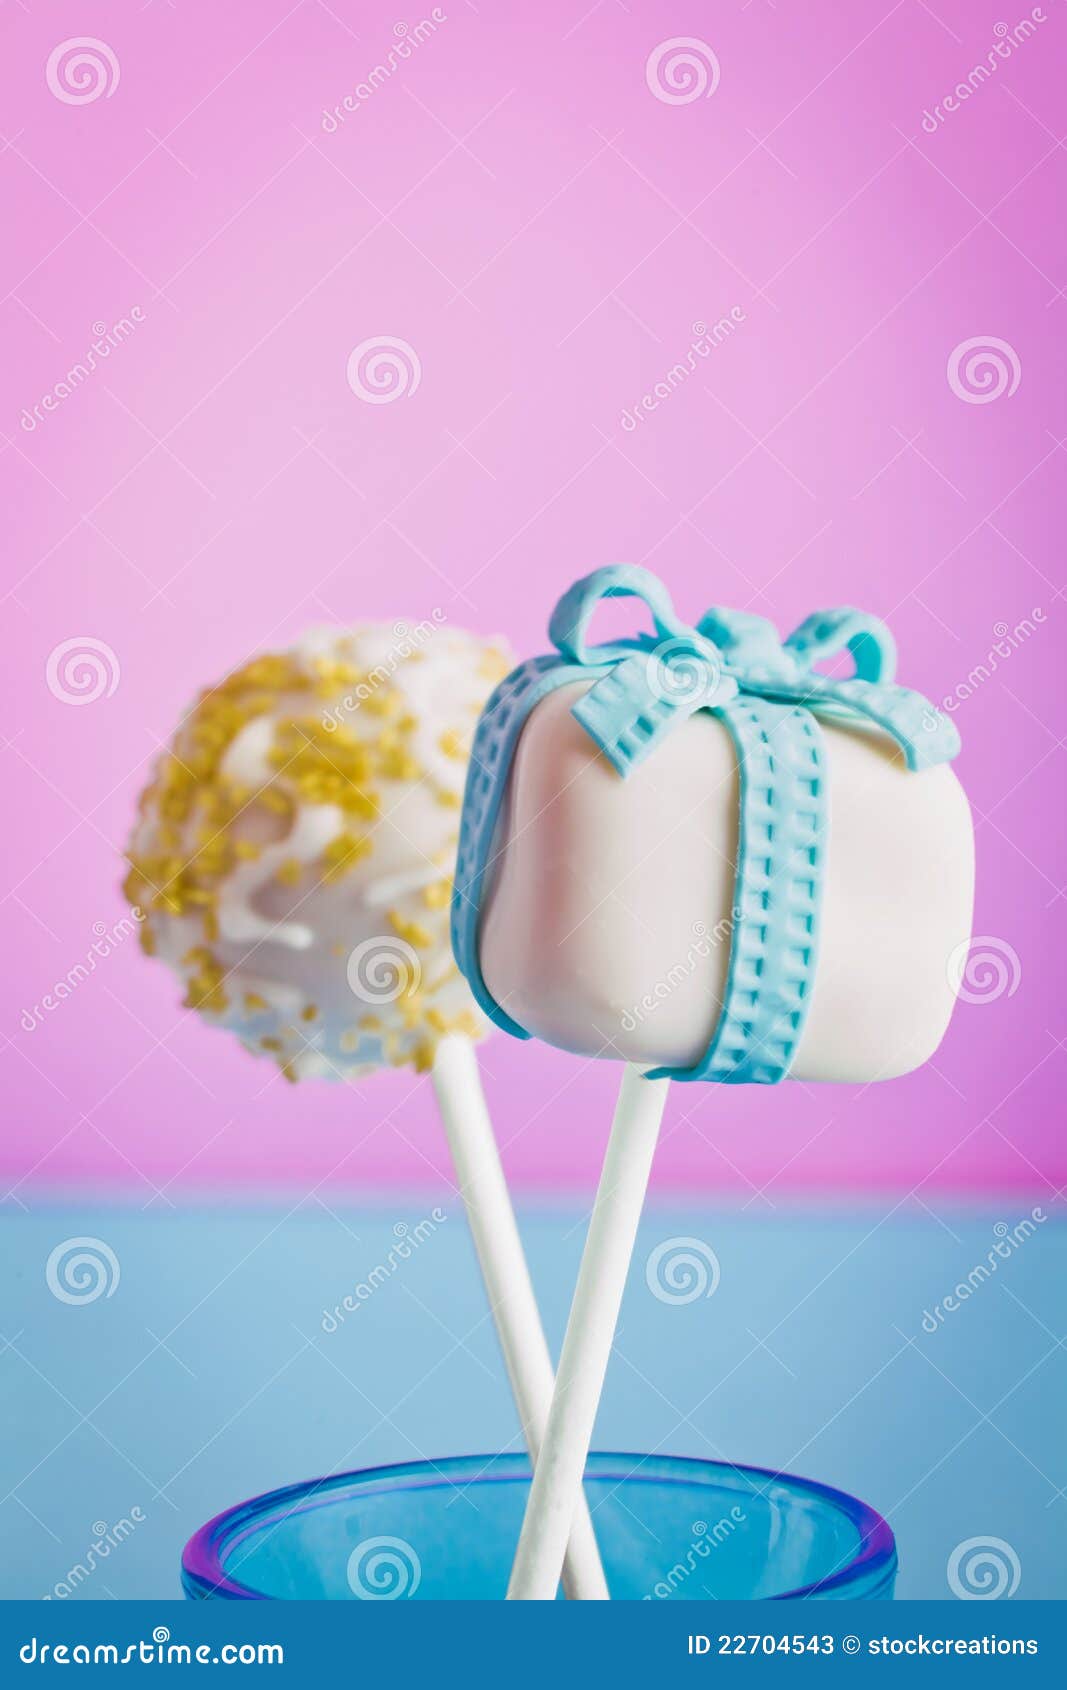 cake pops as a gift with a candle